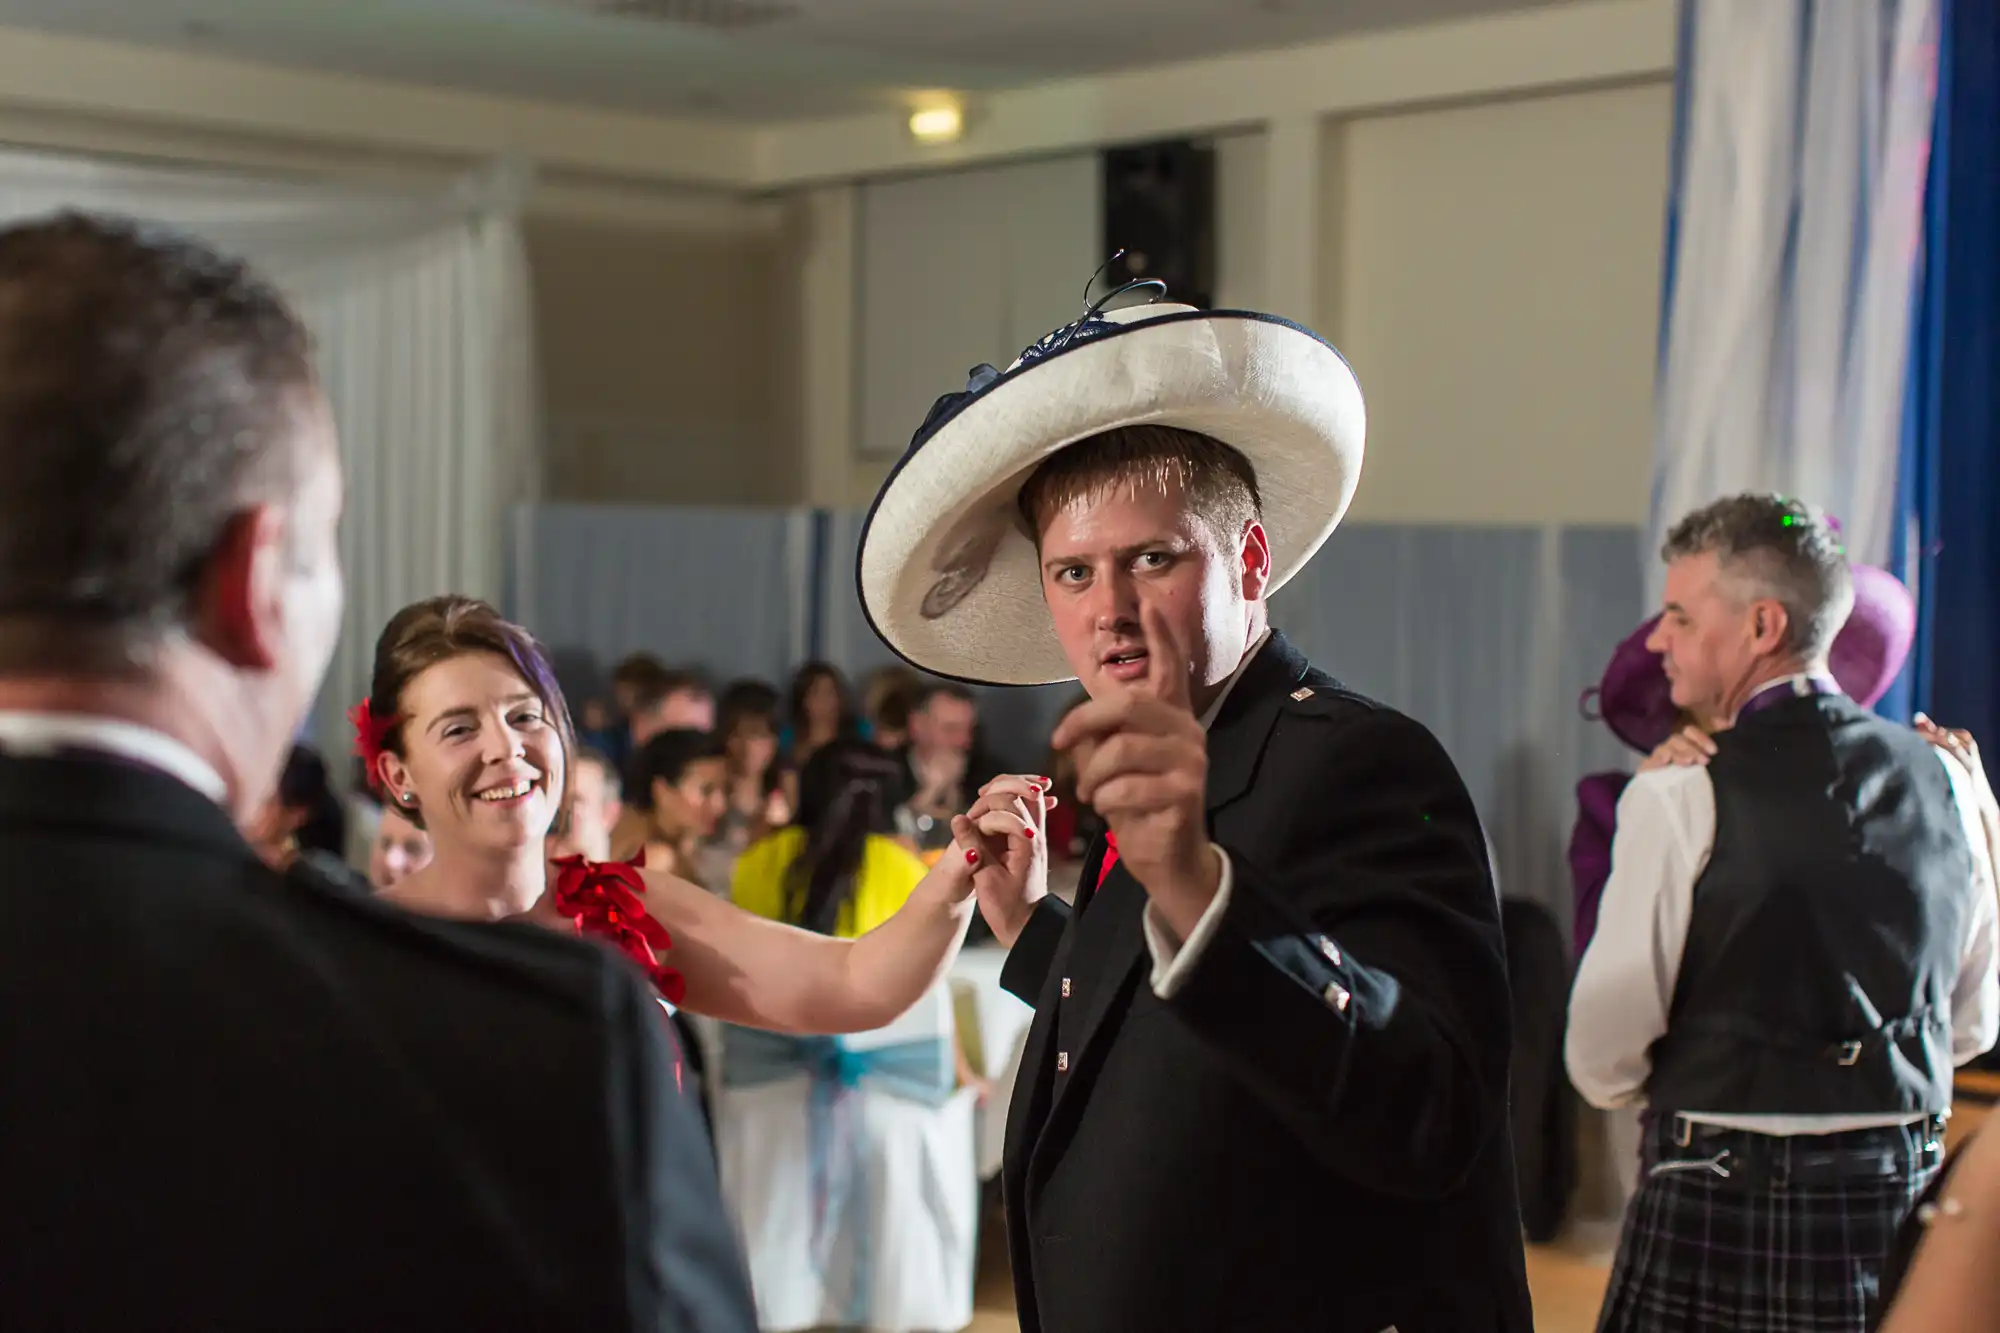 A man in a suit and oversized hat points and looks directly at the camera during a lively dance at a festive event, surrounded by other guests.